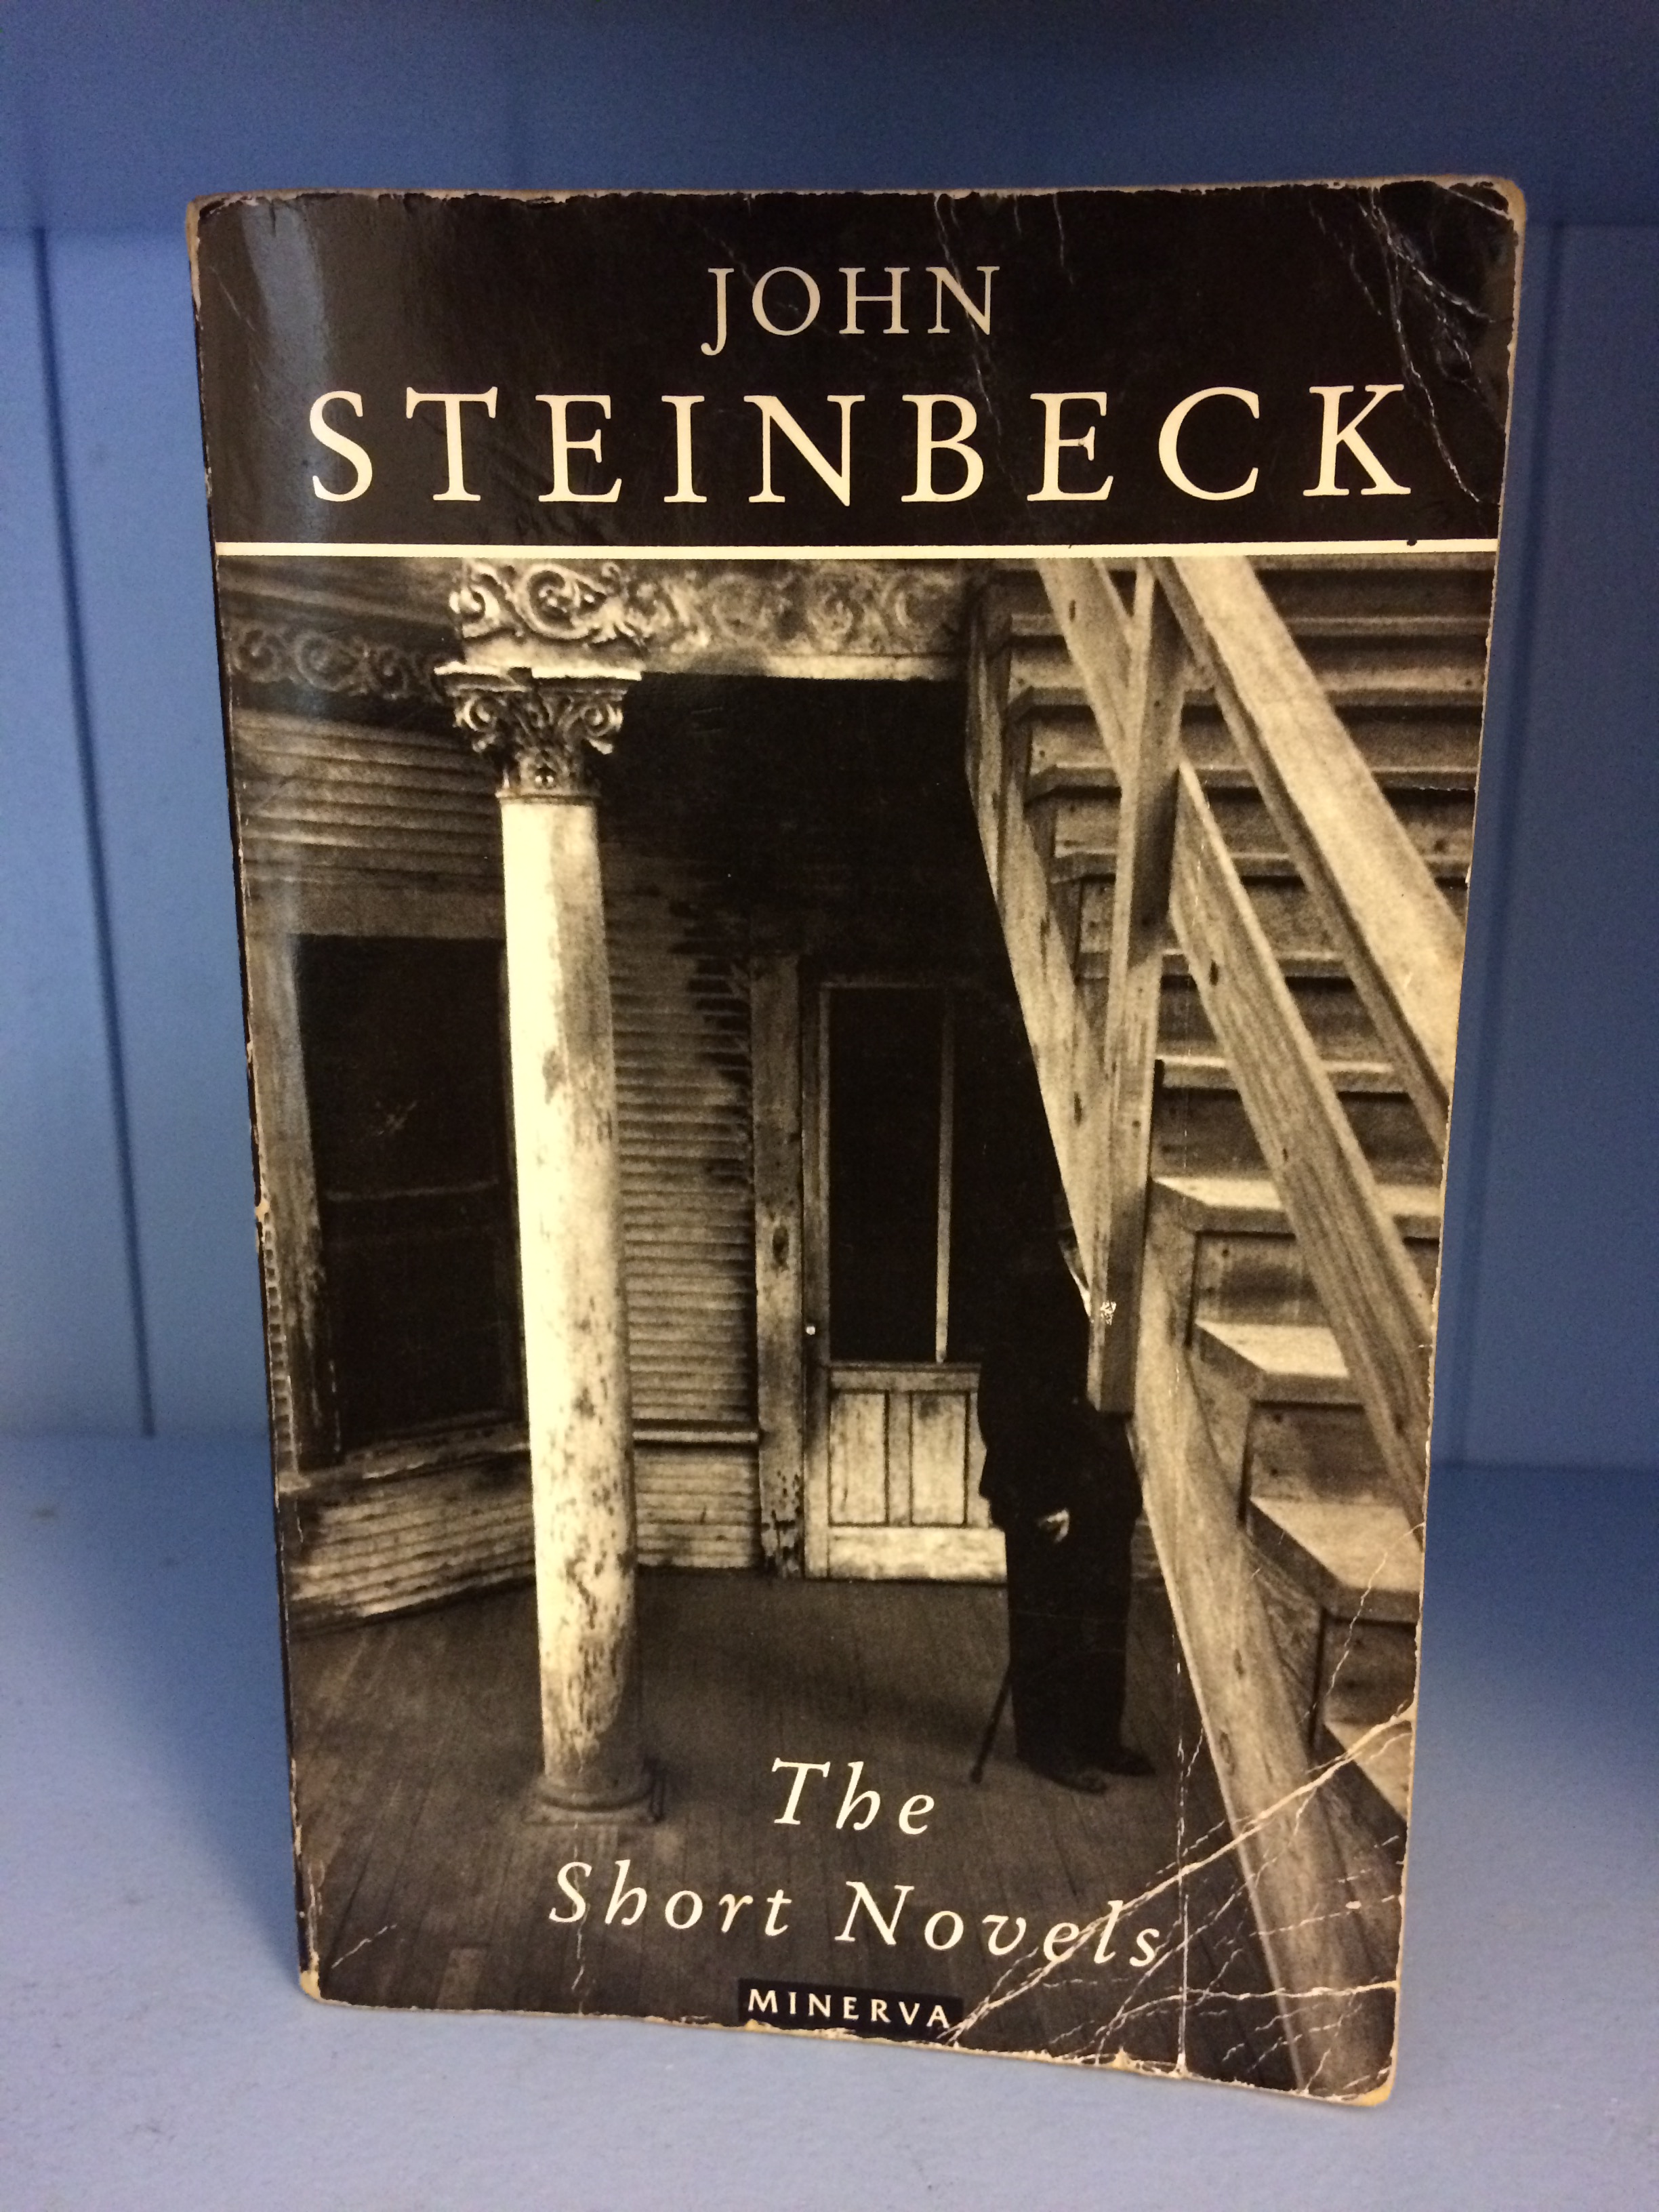 Book is stood up on a blue shelf.
The cover has Steinbeck's name at the top and the title 'The Short Novels' at the bottom. The image on the cover is a man hidden under a wooden staircase in a derelict looking area. A pillar can also be seen holding up the second level.